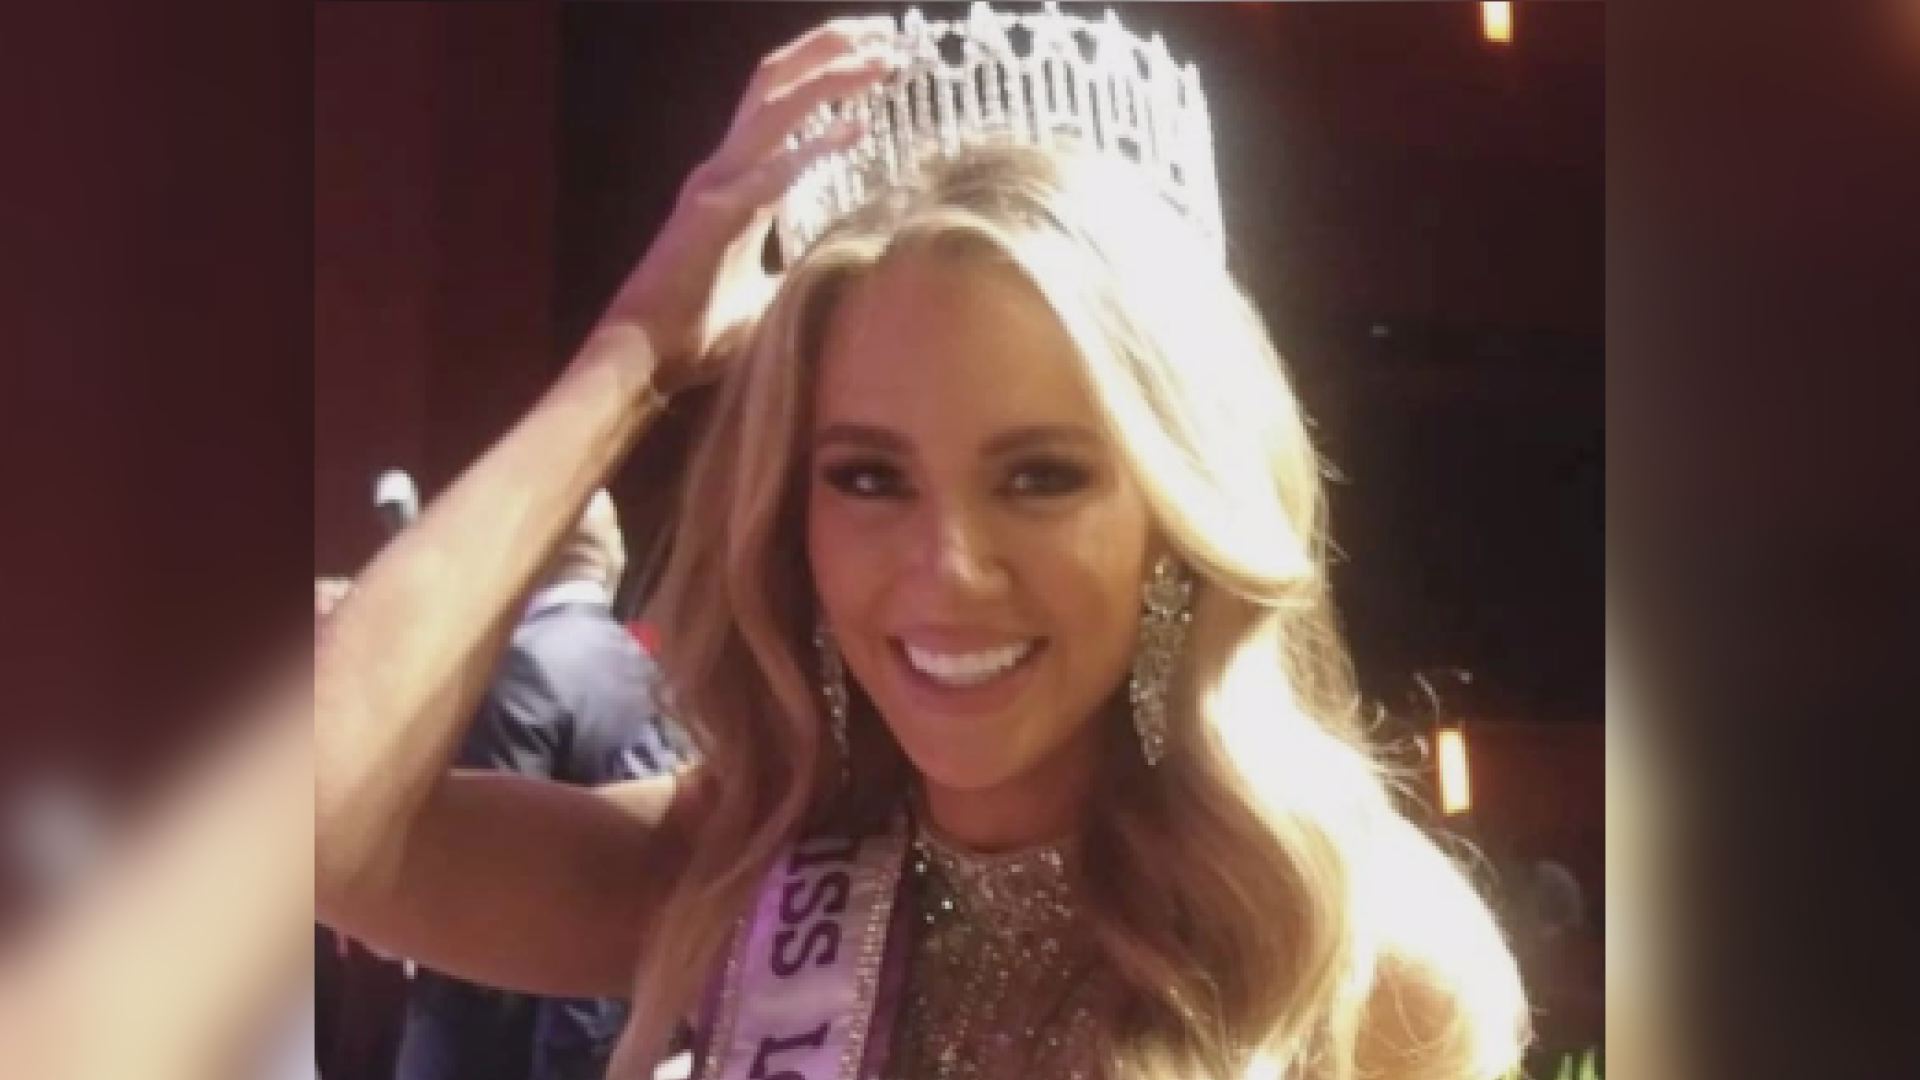 Miss Louisiana heads off to compete in Miss USA 2019 pageant